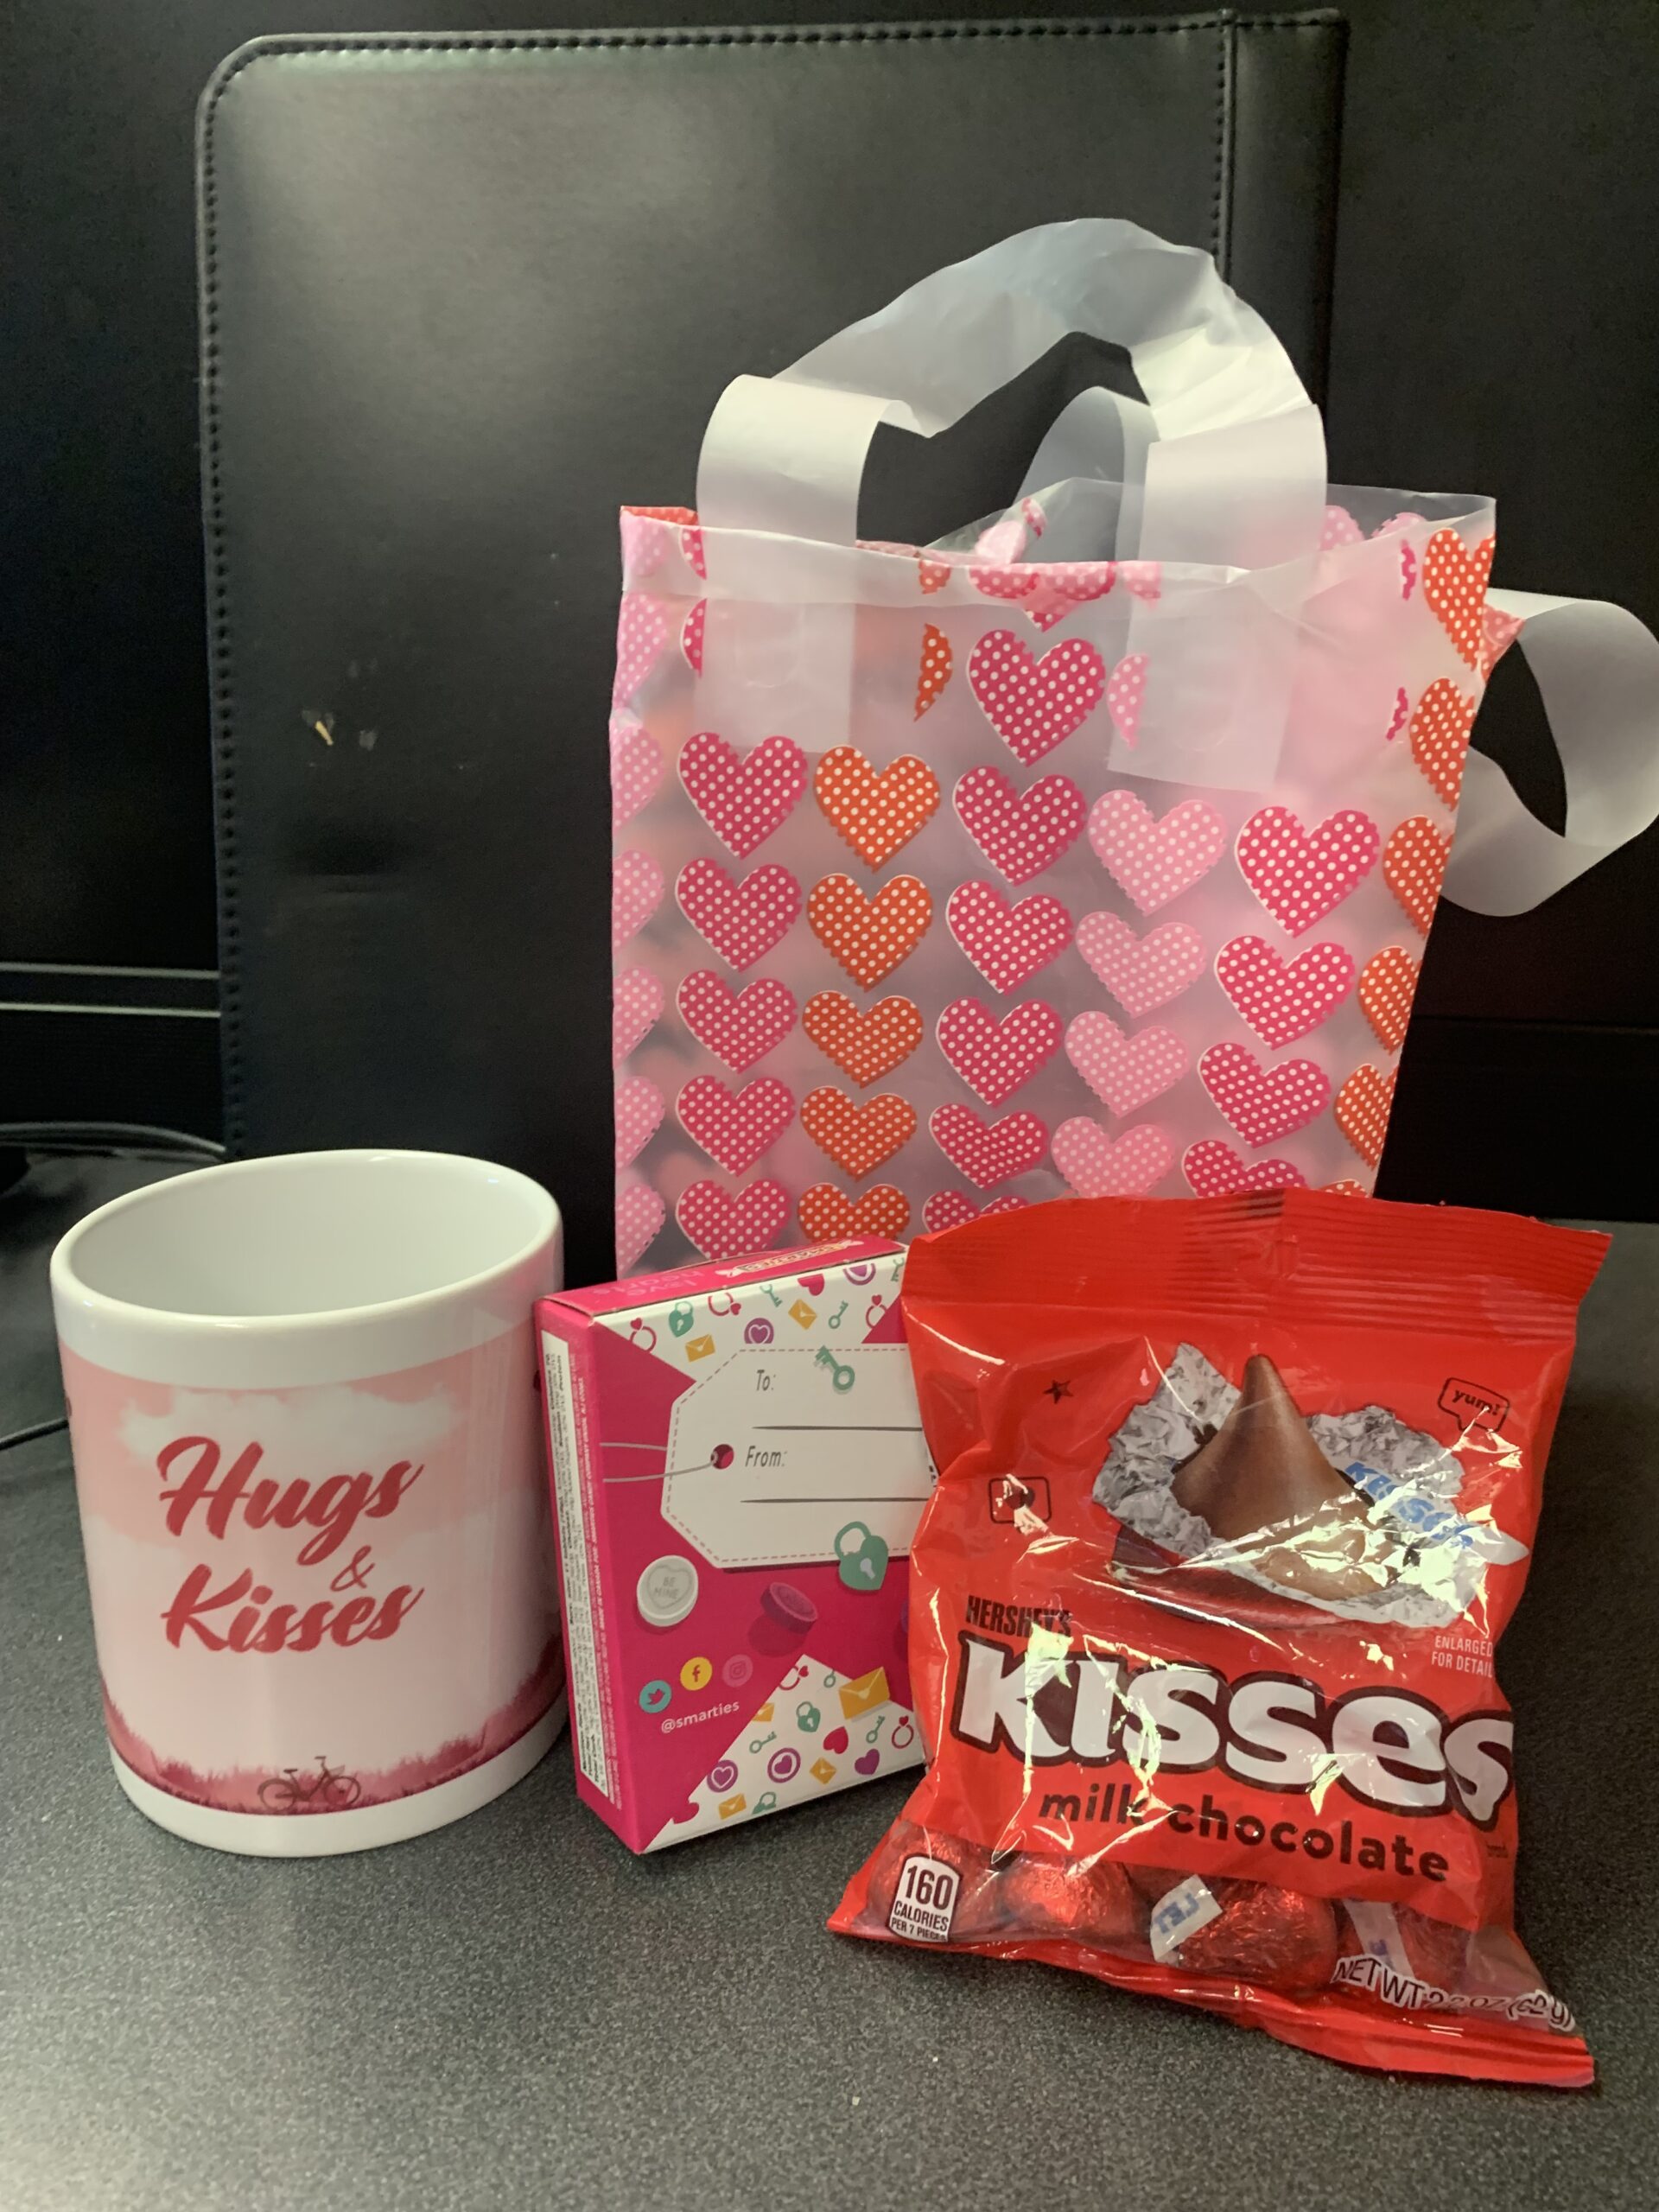 A small ceramic mug with print saying "Hugs & Kisses", a small box of heart candies, and a small bag of Hershey's Valentine's Kisses, in front of a matching Valentine's Day gift bag.